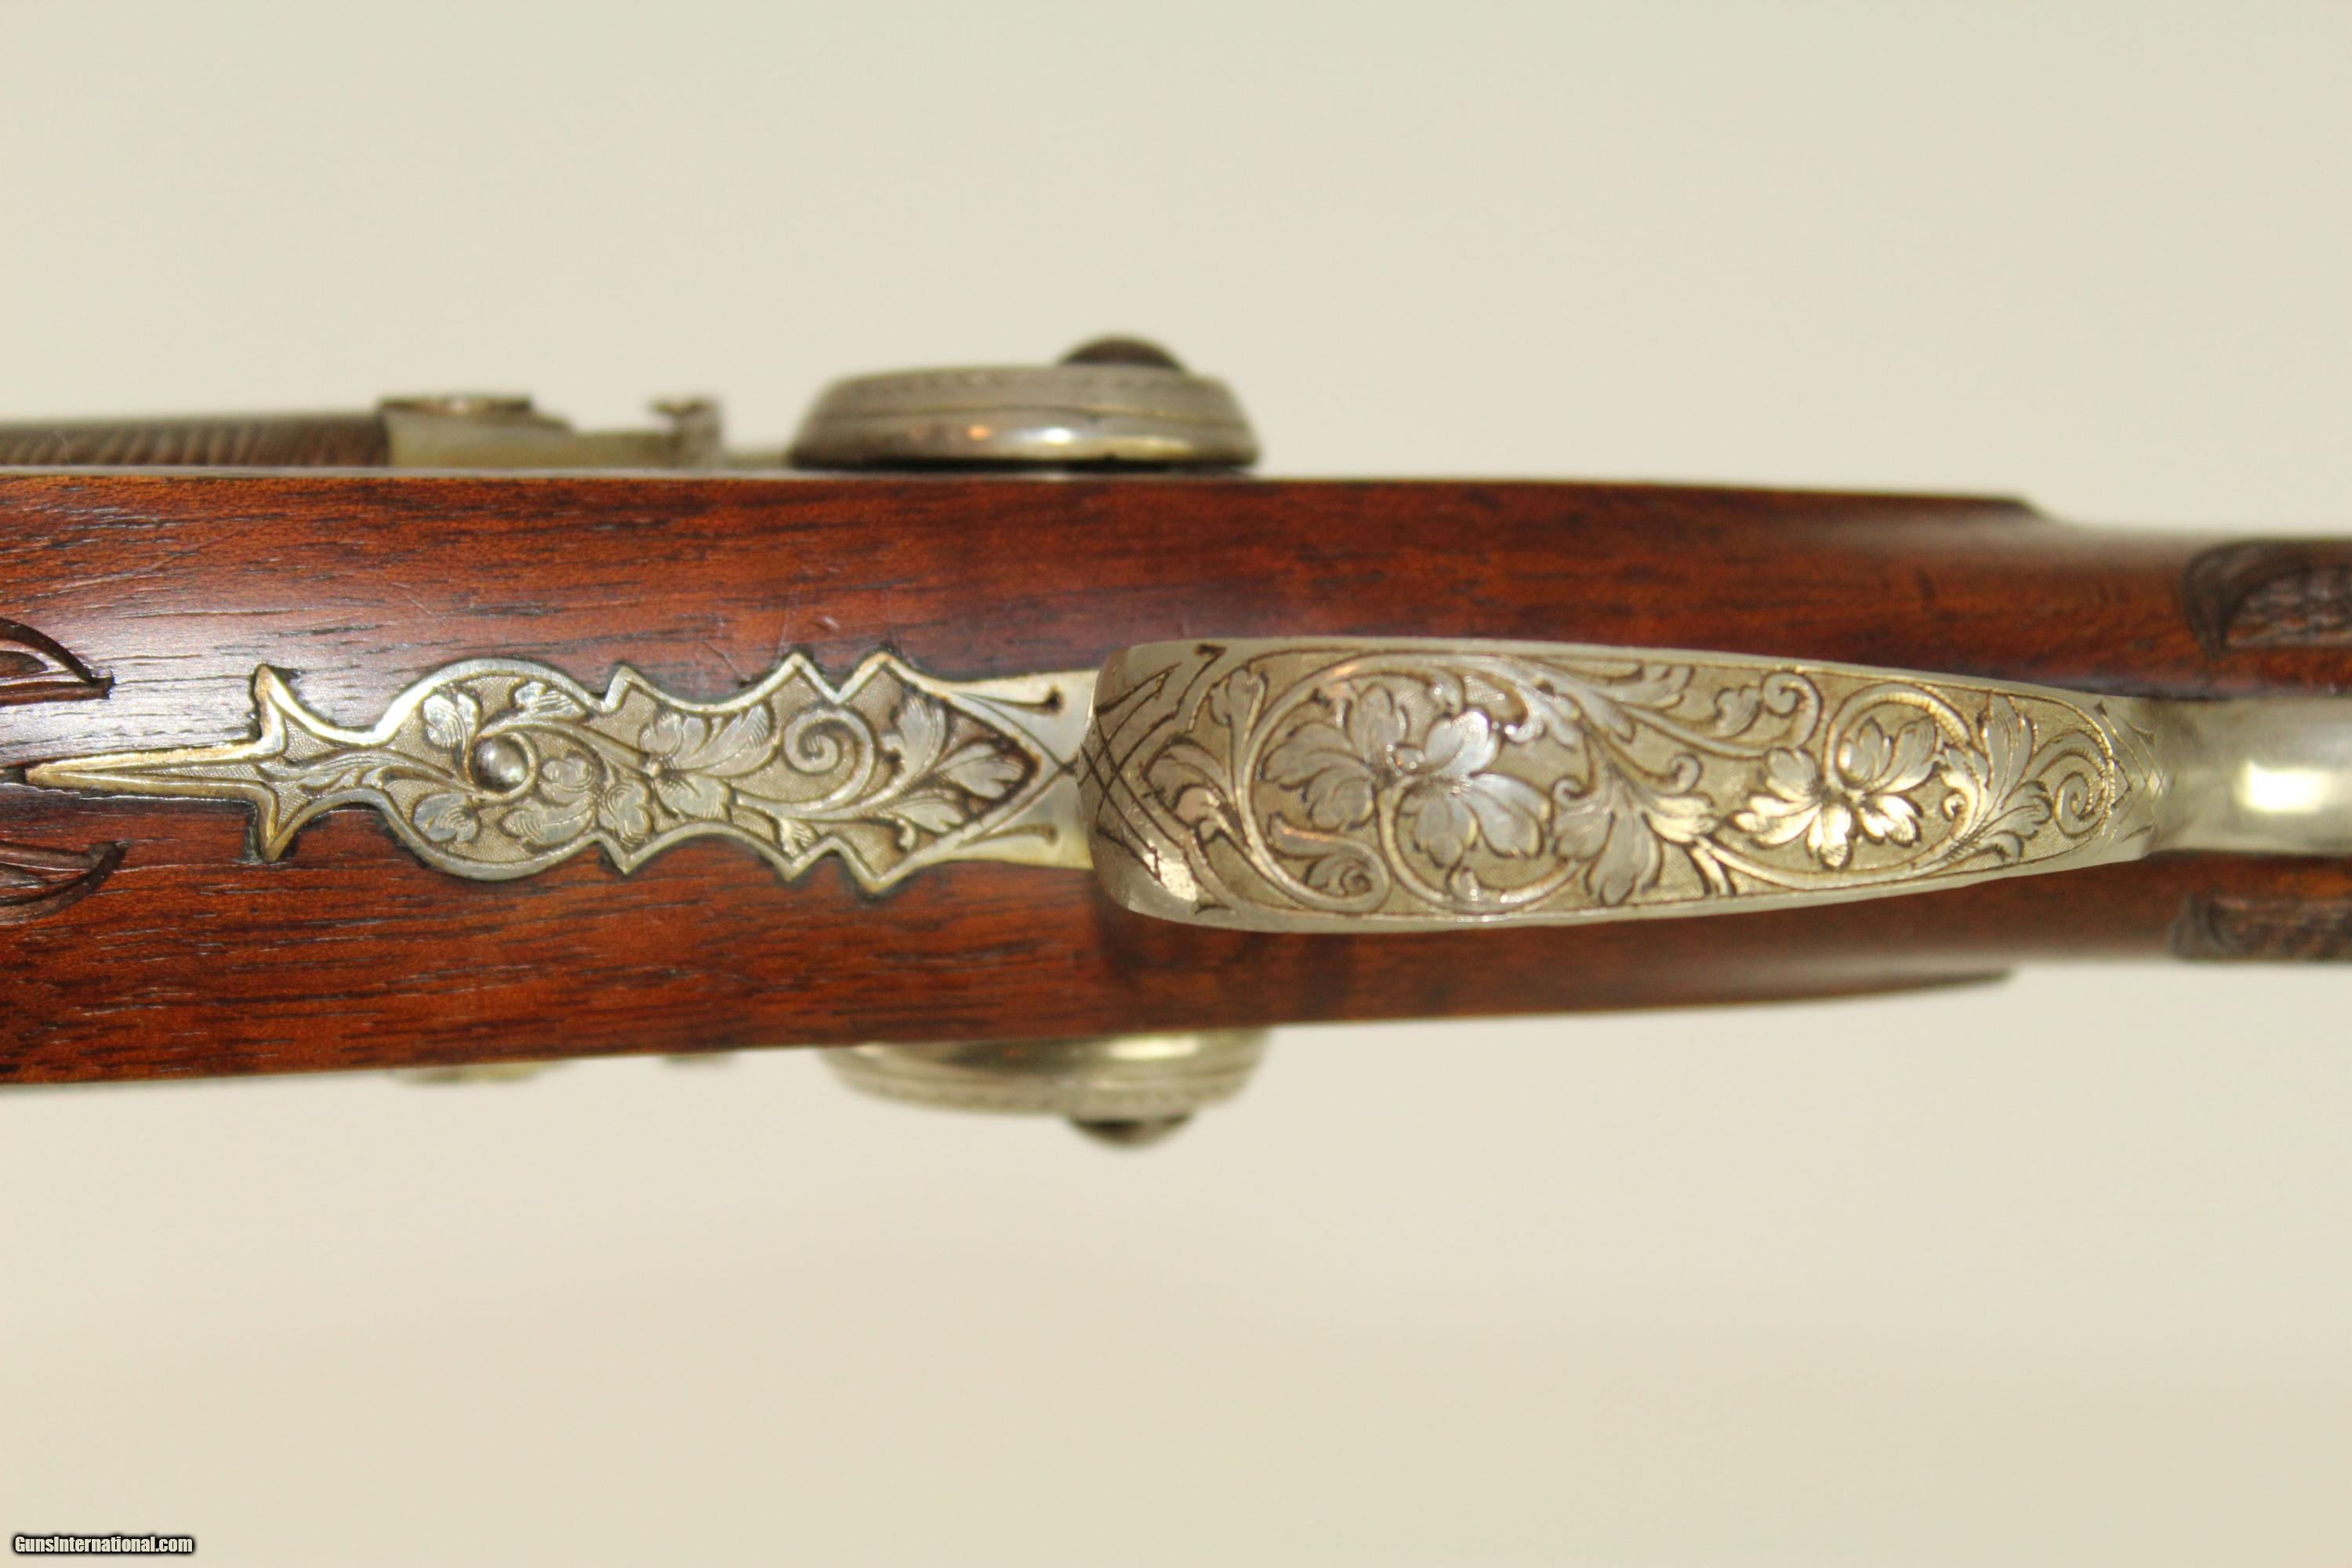 FINE & ORNATE 32 Gauge Belgian SxS Percussion Shotgun, Engraved and Carved